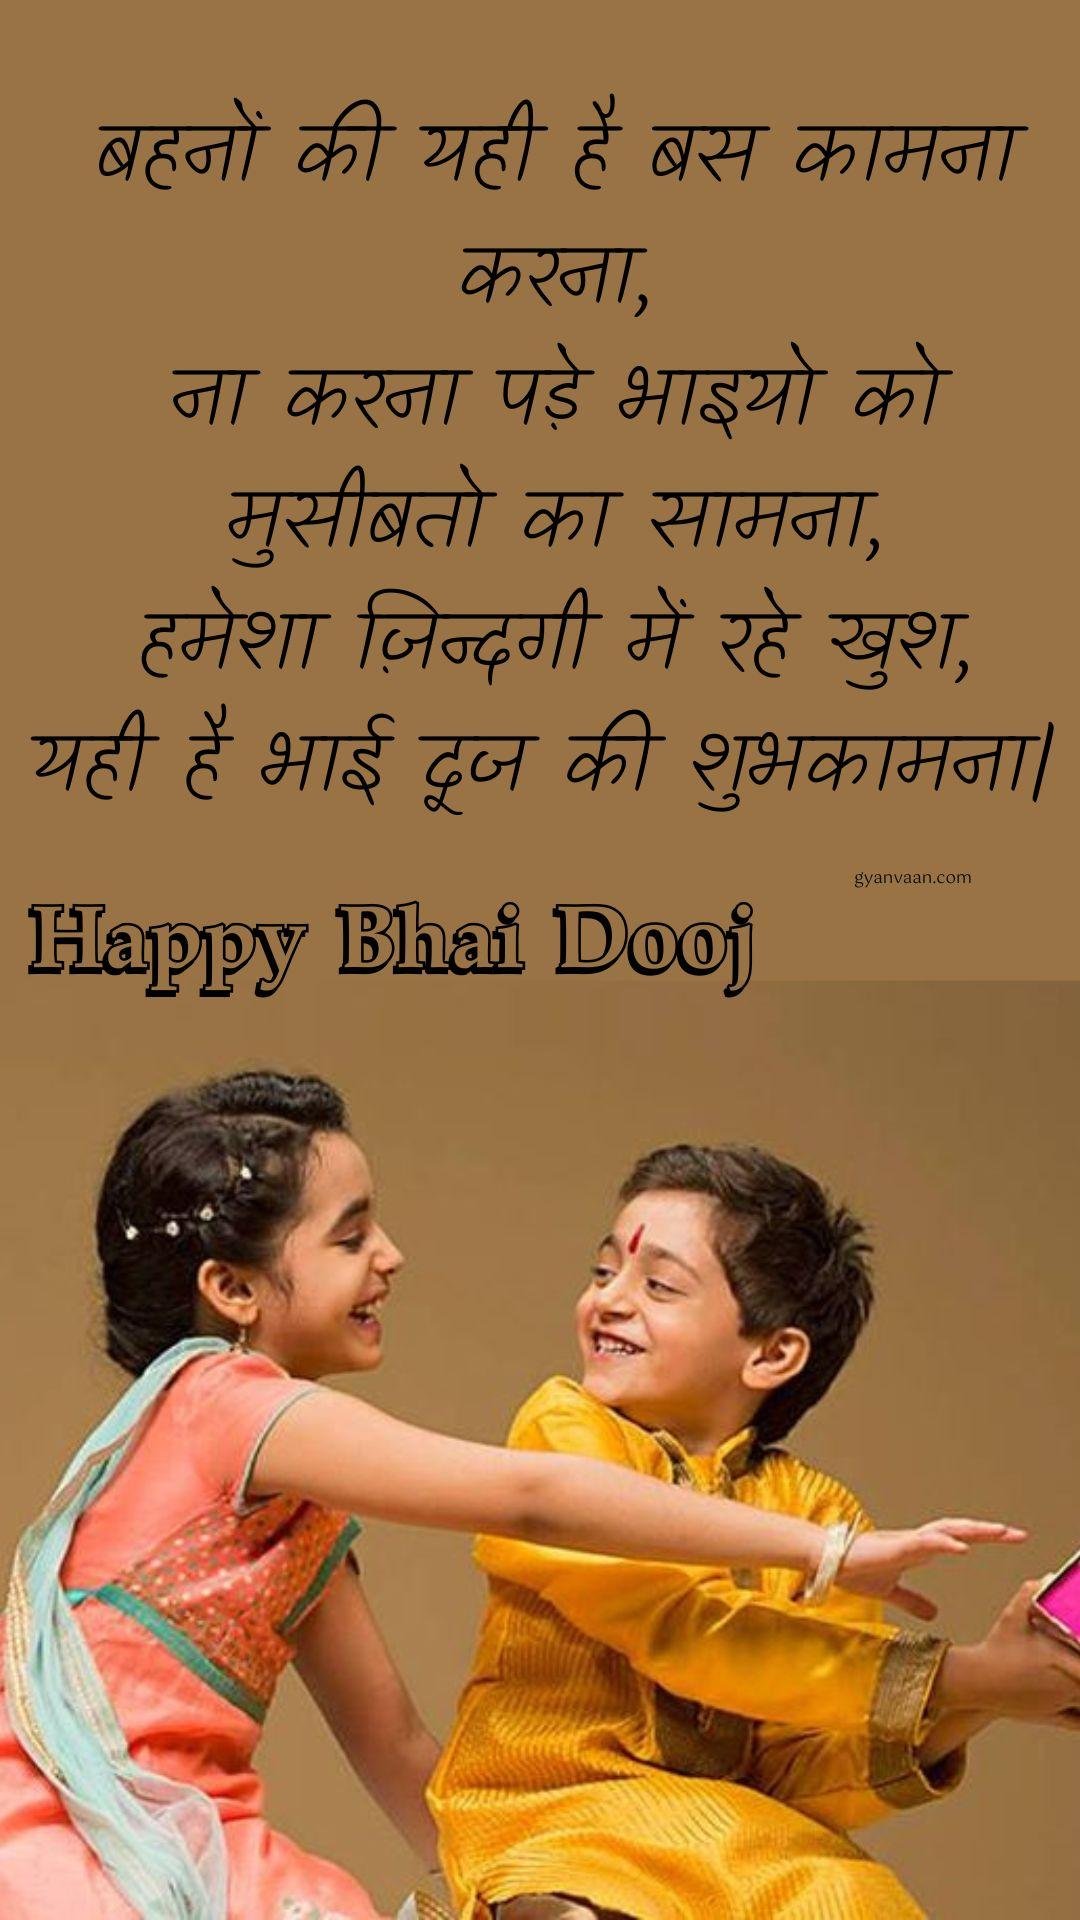 Happy Bhai Dooj Wishes In Hindi With Quotes Status Shubhkamnaye And Messages For Mobile 6 - Bhai Dooj Wishes In Hindi